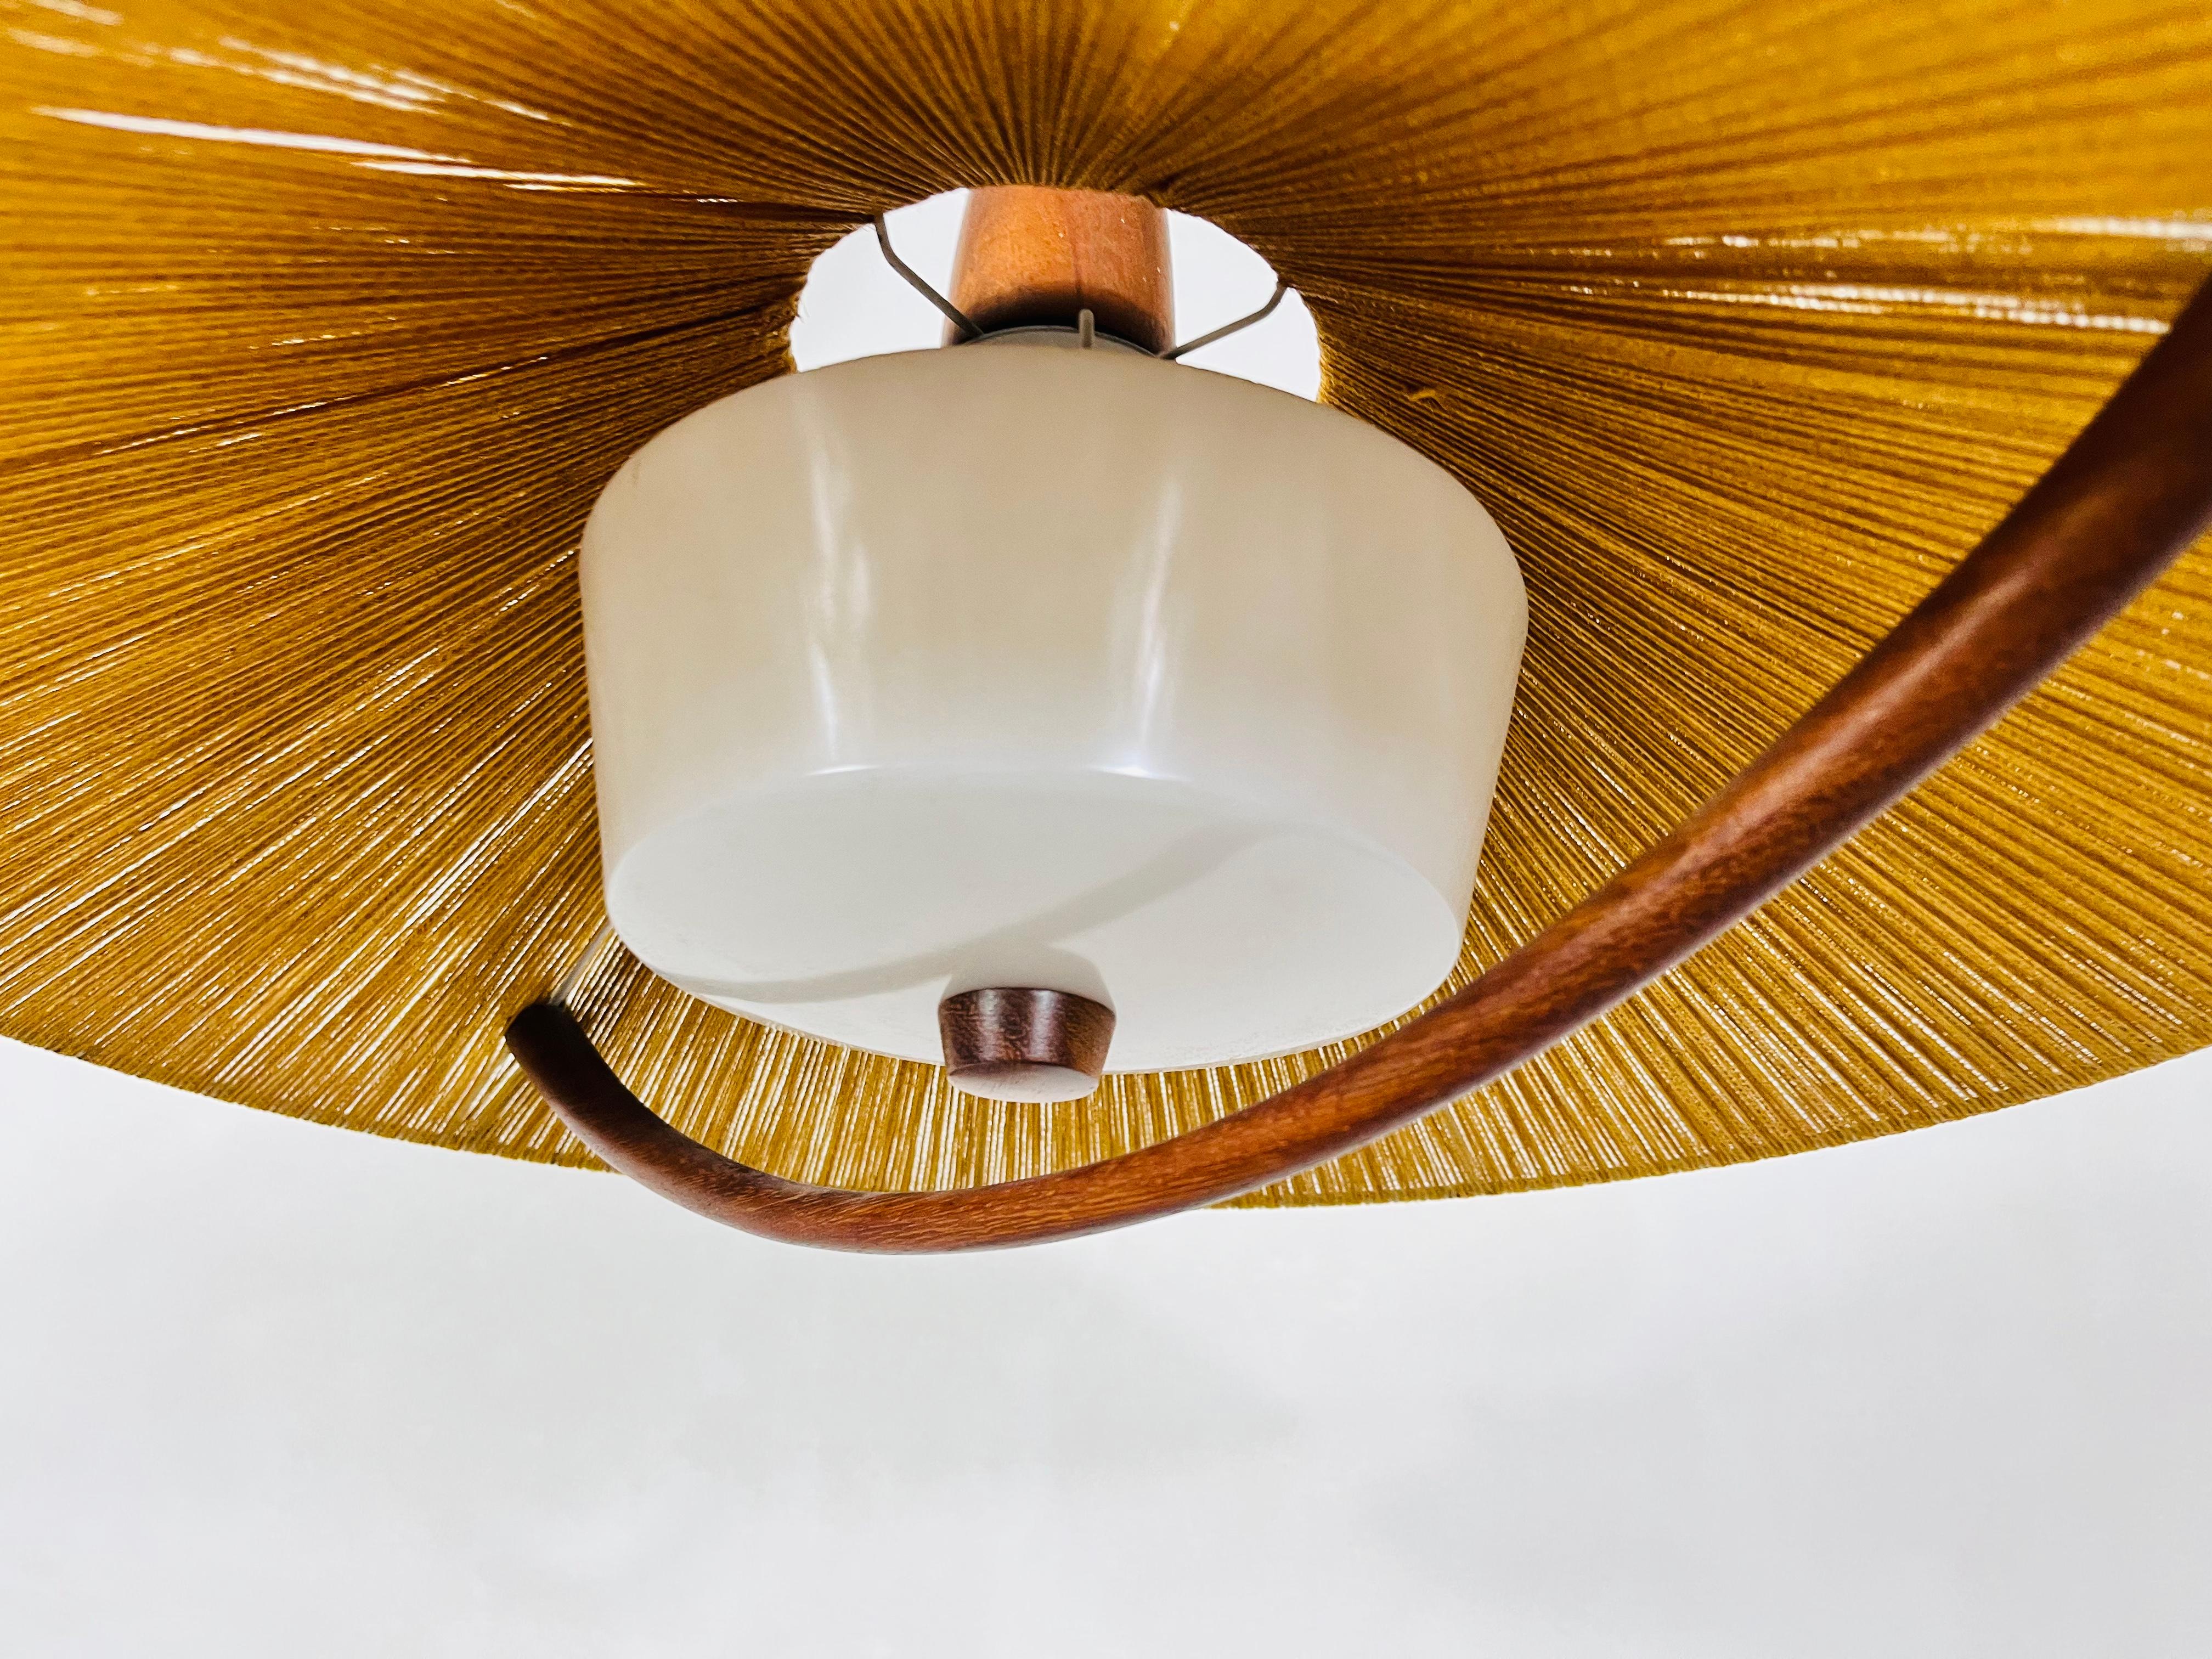 Rattan Midcentury Teak and Cord Shade Hanging Lamp by Temde, circa 1960 For Sale